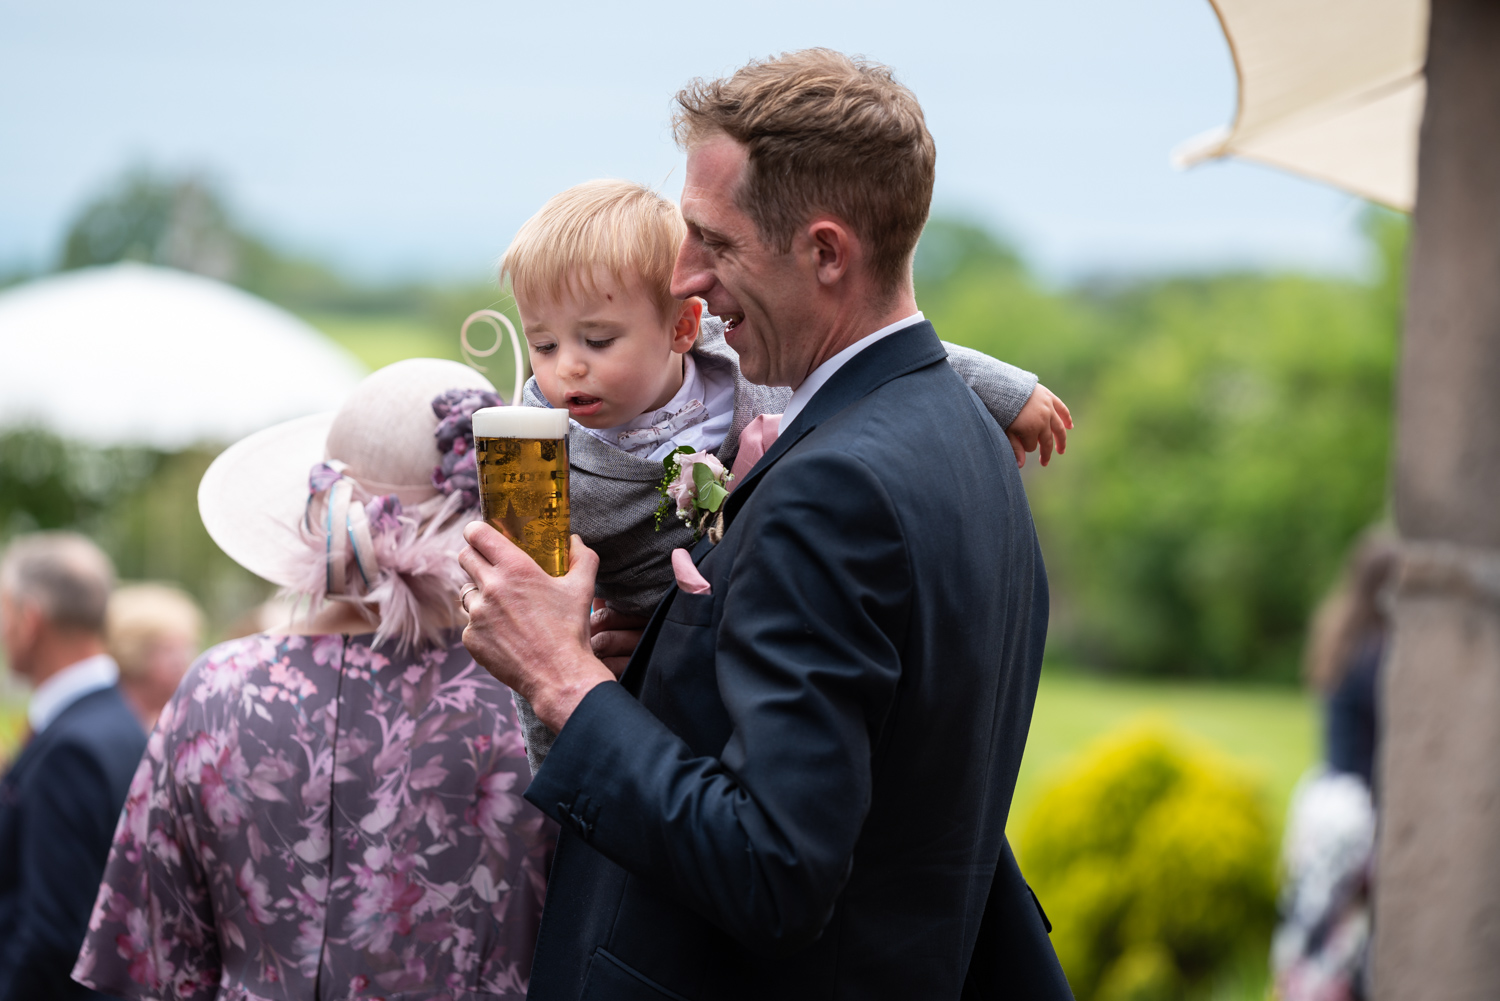 Baby trying to drink beer at wedding